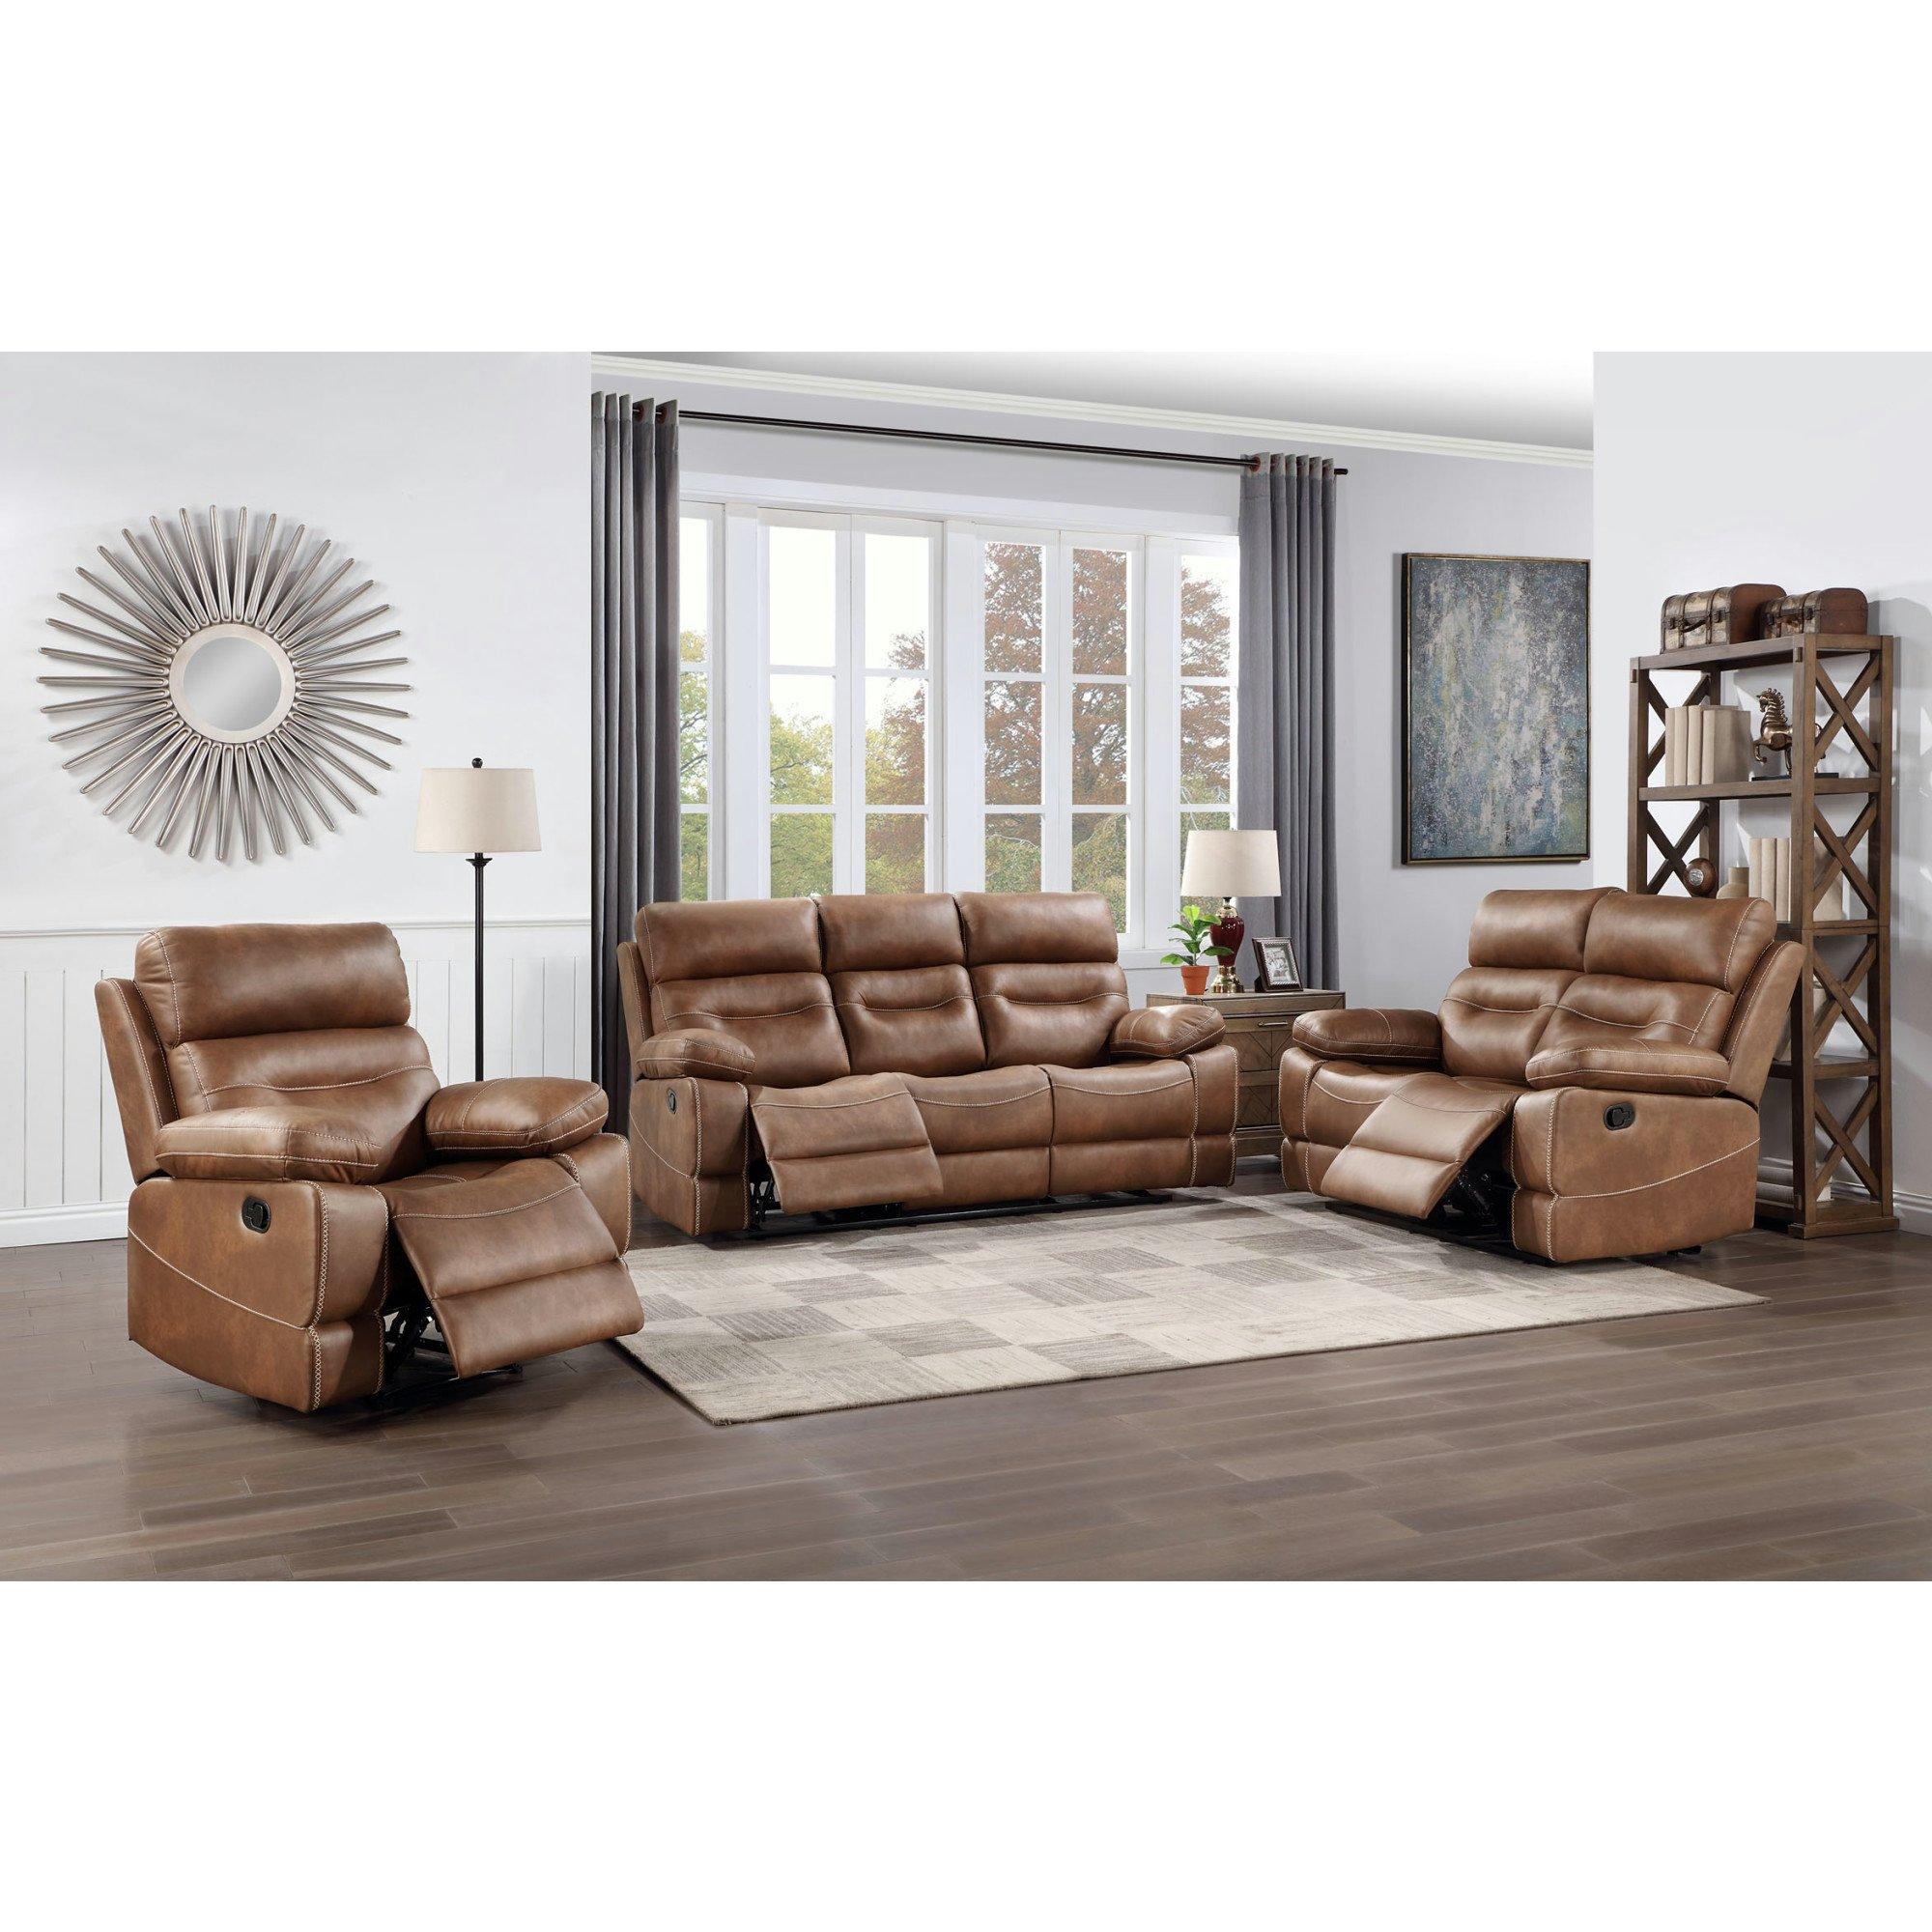 To Own Steve Silver Furniture Rudger Reclining Sofa Loveseat Recliner At Aaron S Today